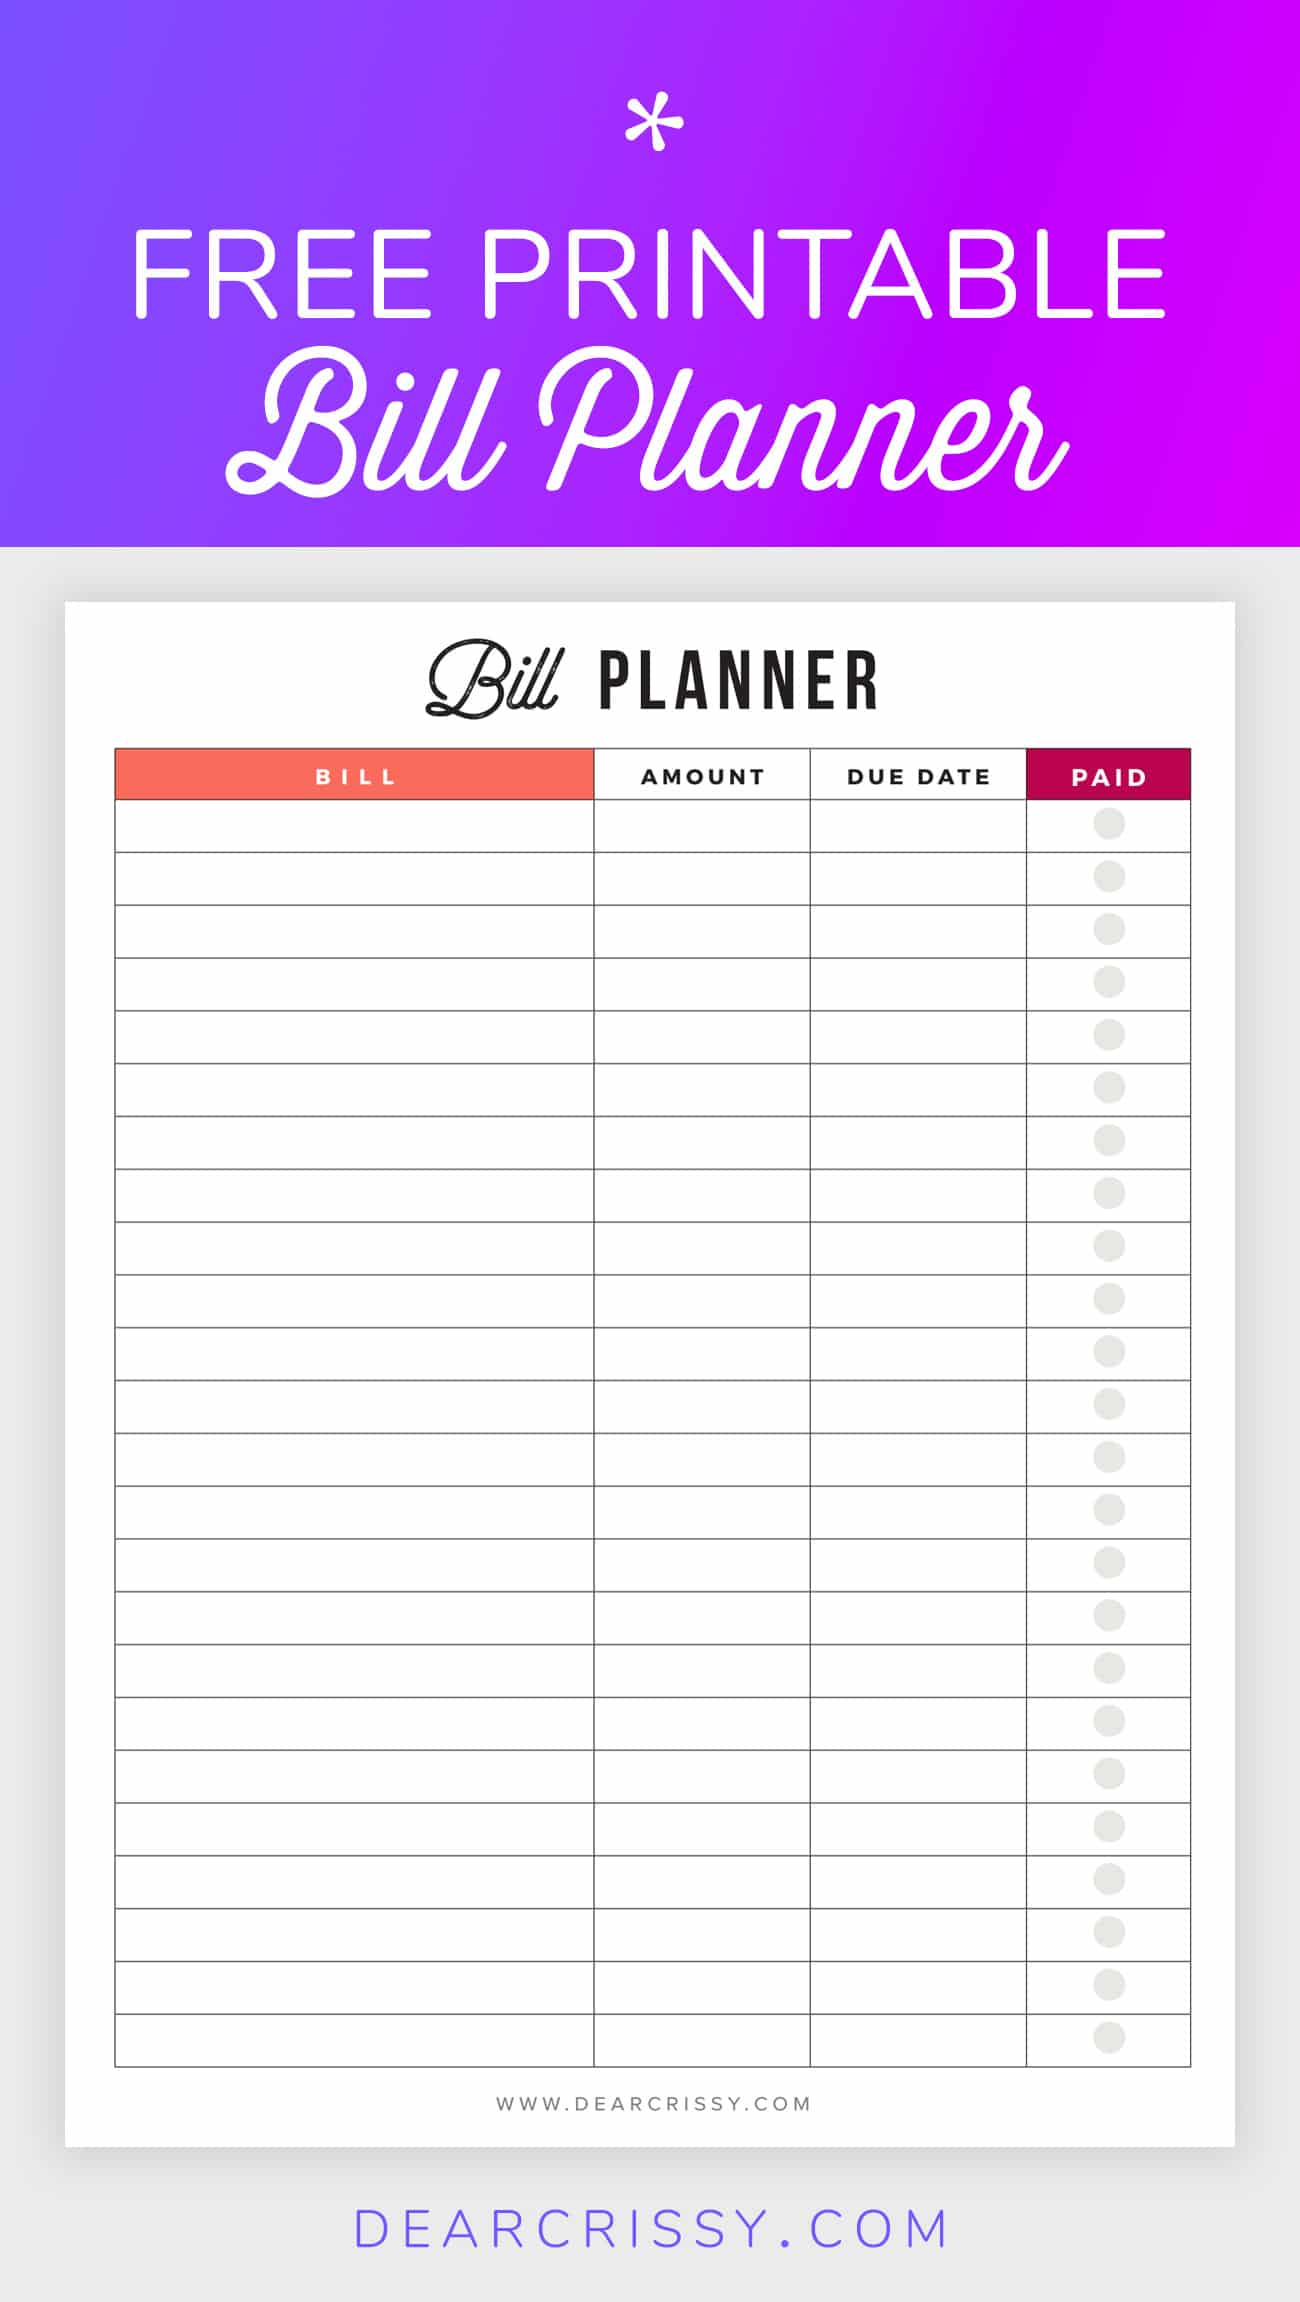 Bill Planner Printable - Pay Down Your Bills This Year!